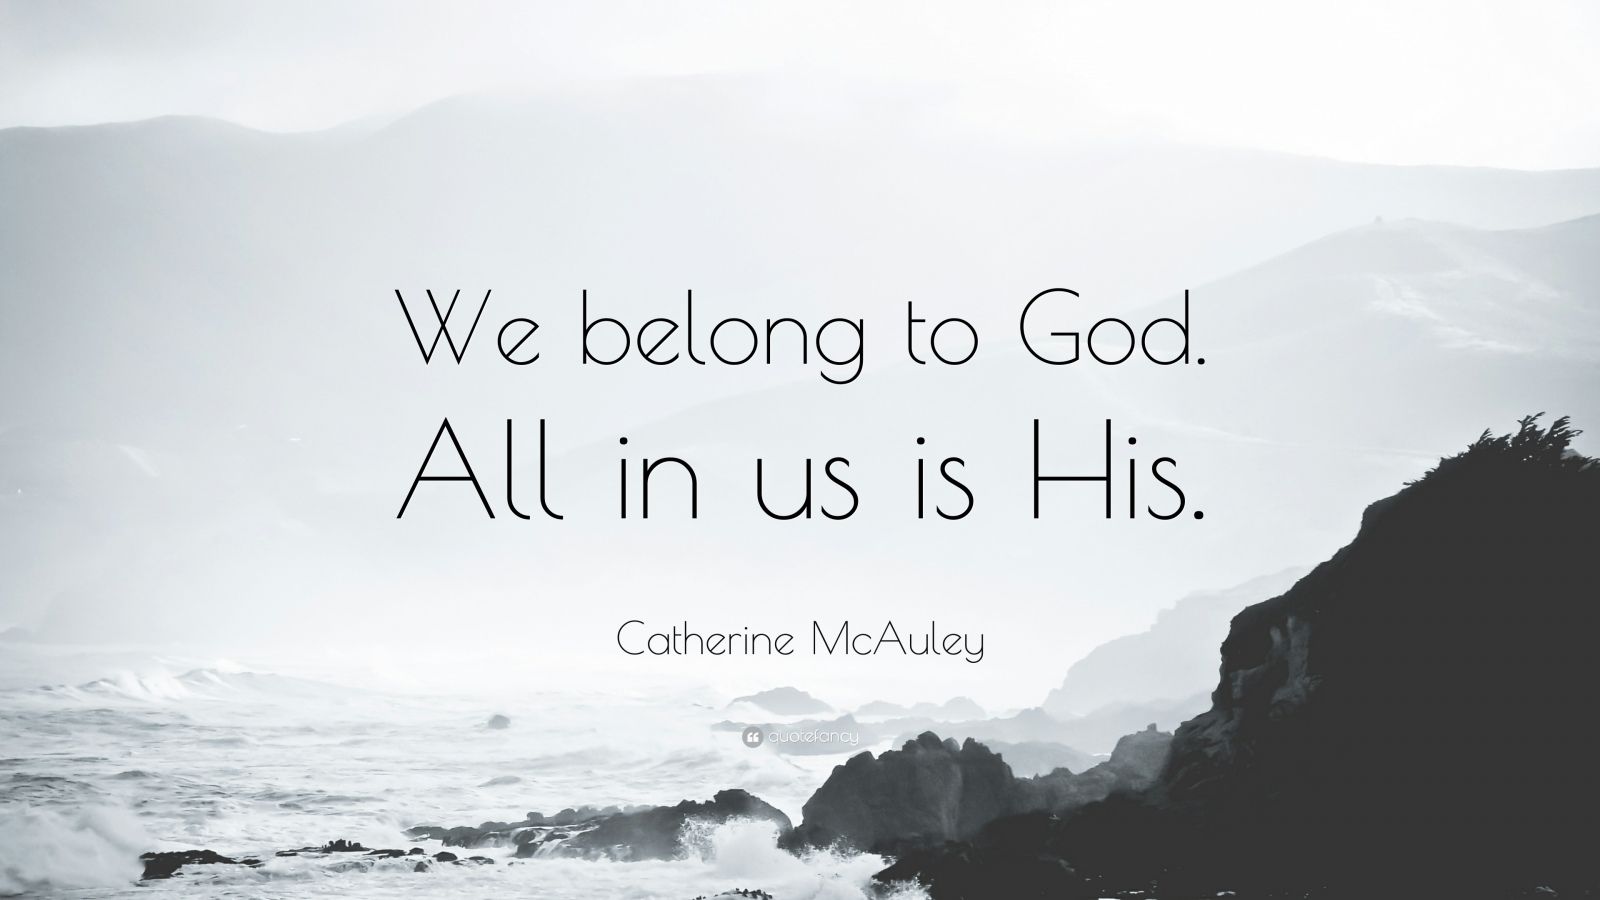 Catherine McAuley Quotes (23 wallpapers) - Quotefancy